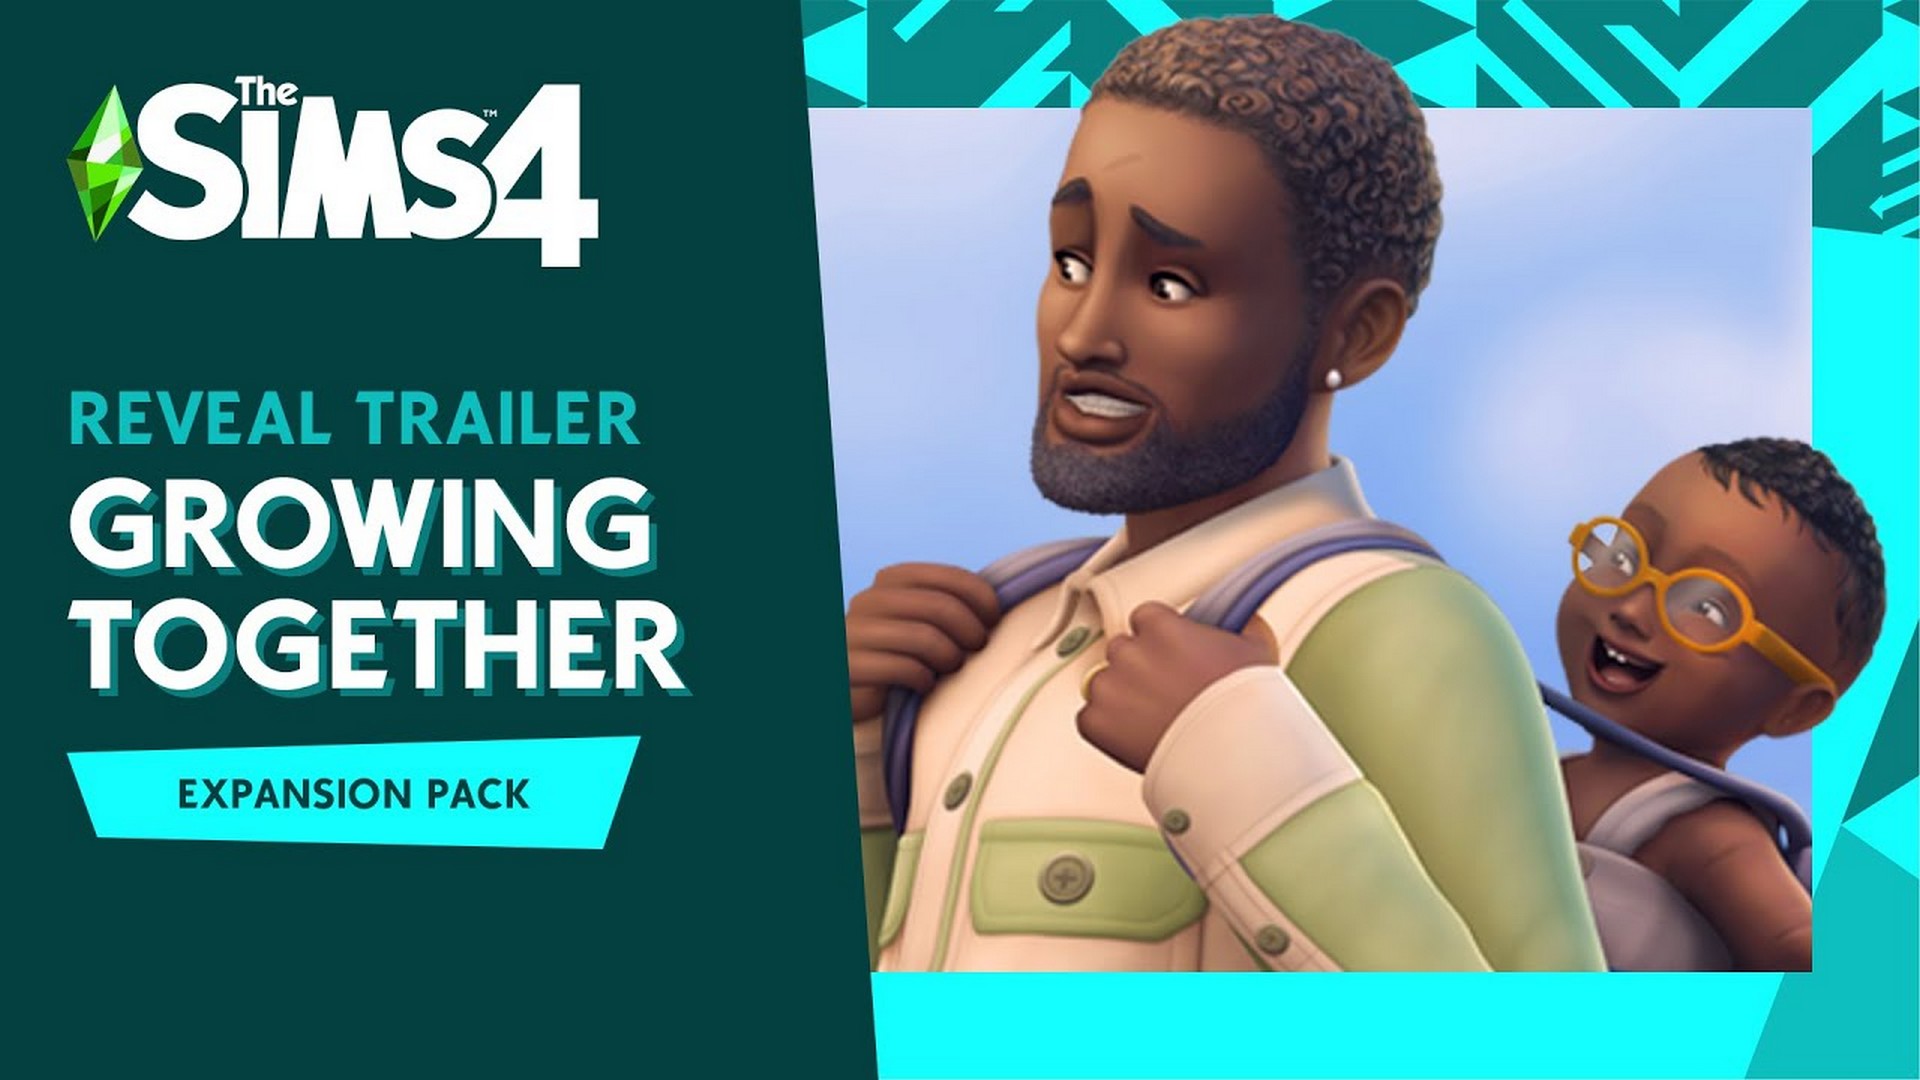 The Sims 4 Announces The Growing Together Expansion Pack